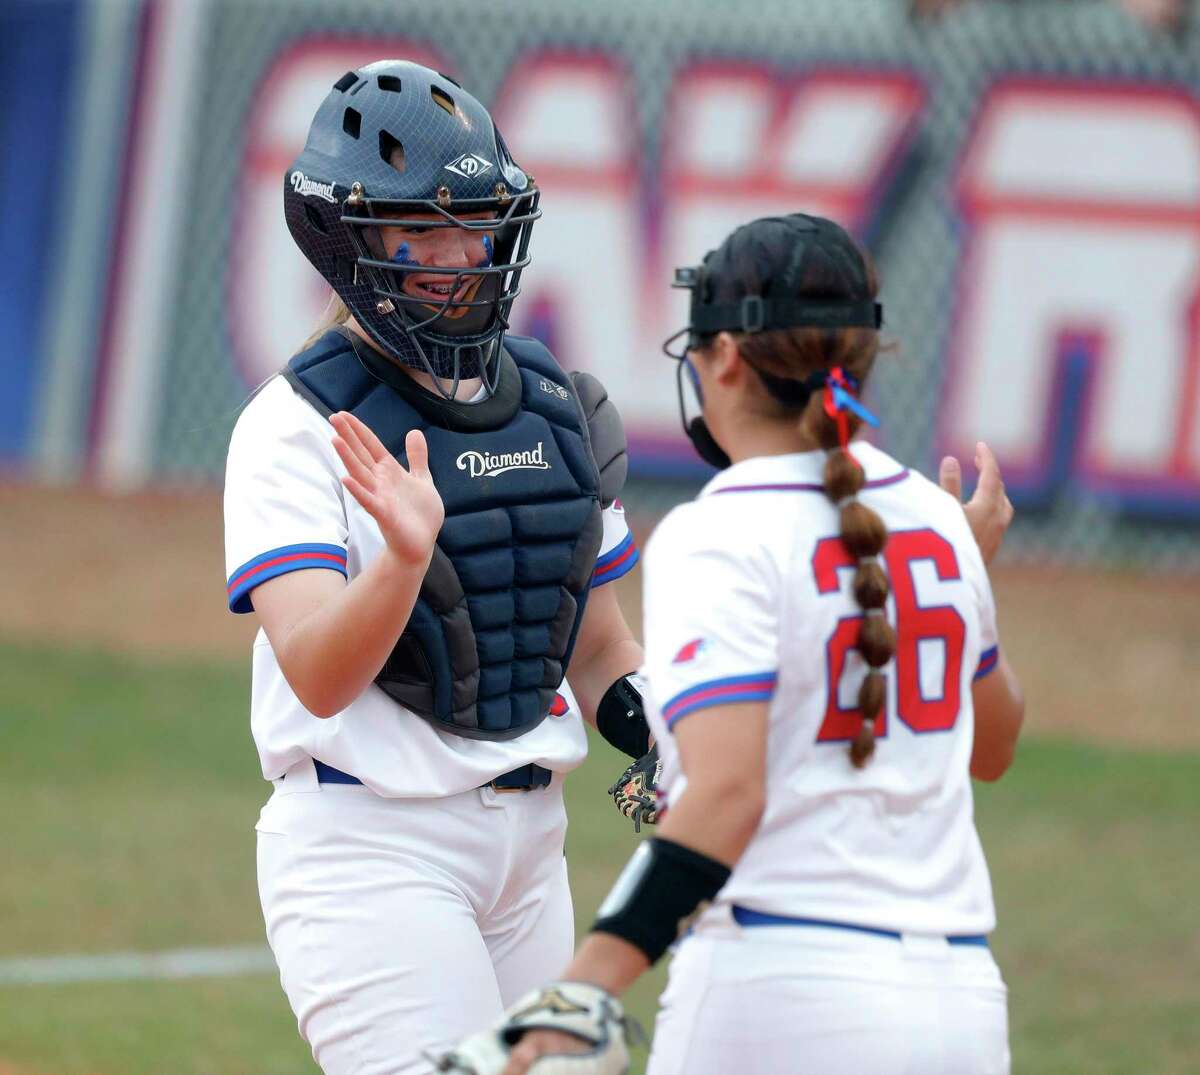 Oak Ridge catcher Ella Boyer (75) gets a high-five from first baseman Alexia Villegas (26) after catching a fly ball by Jasmine Bouziri #2 of College Park in the first inning of a District 13-6A high school softball game at Oak Ridge High School, Tuesday, April 19, 2022.